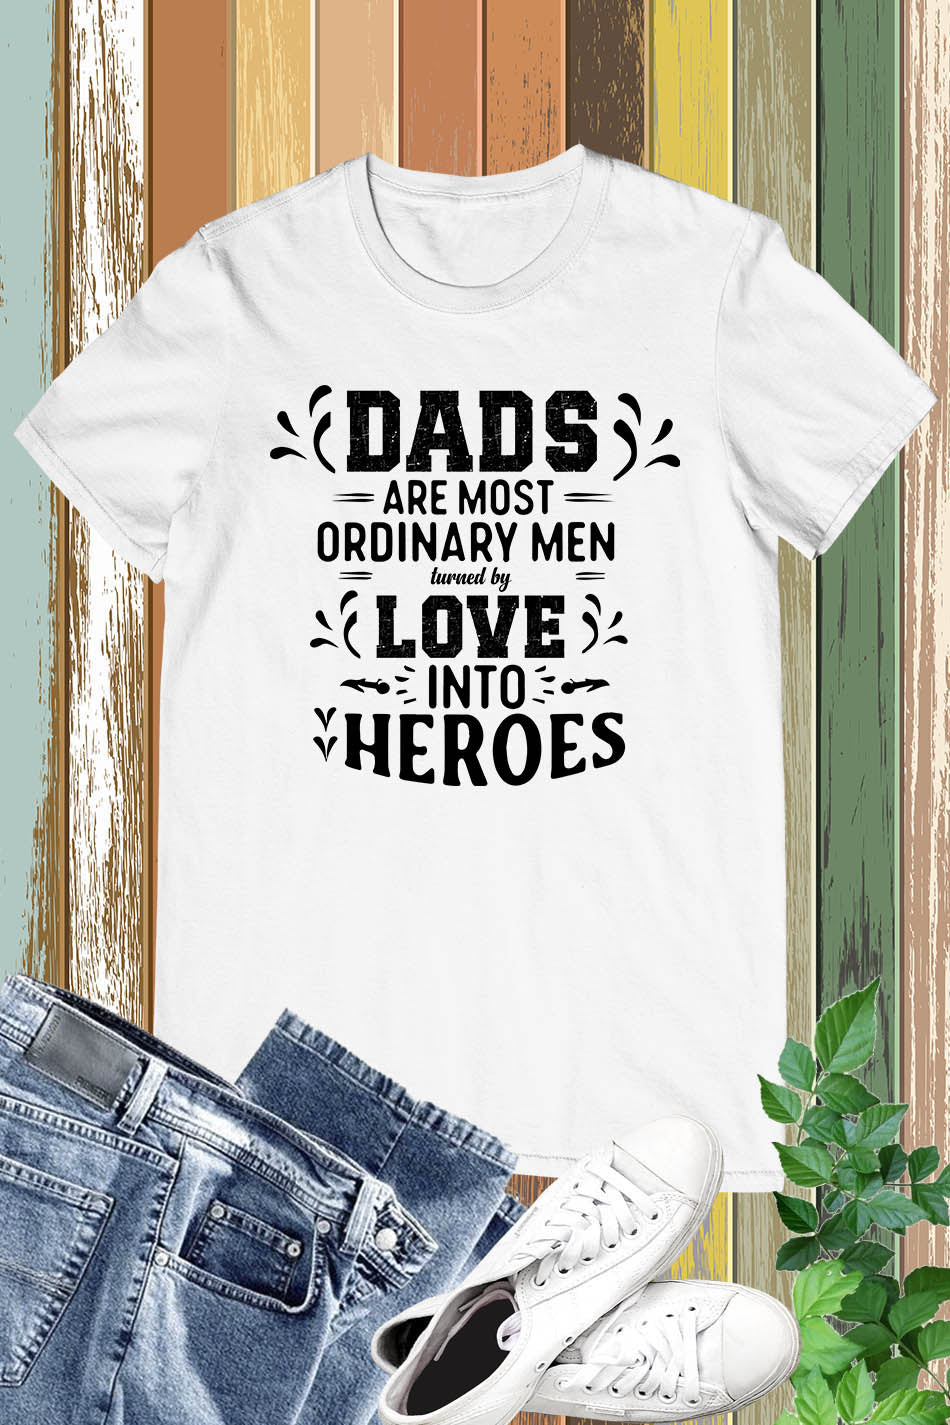 Dads Are Heroes Shirt